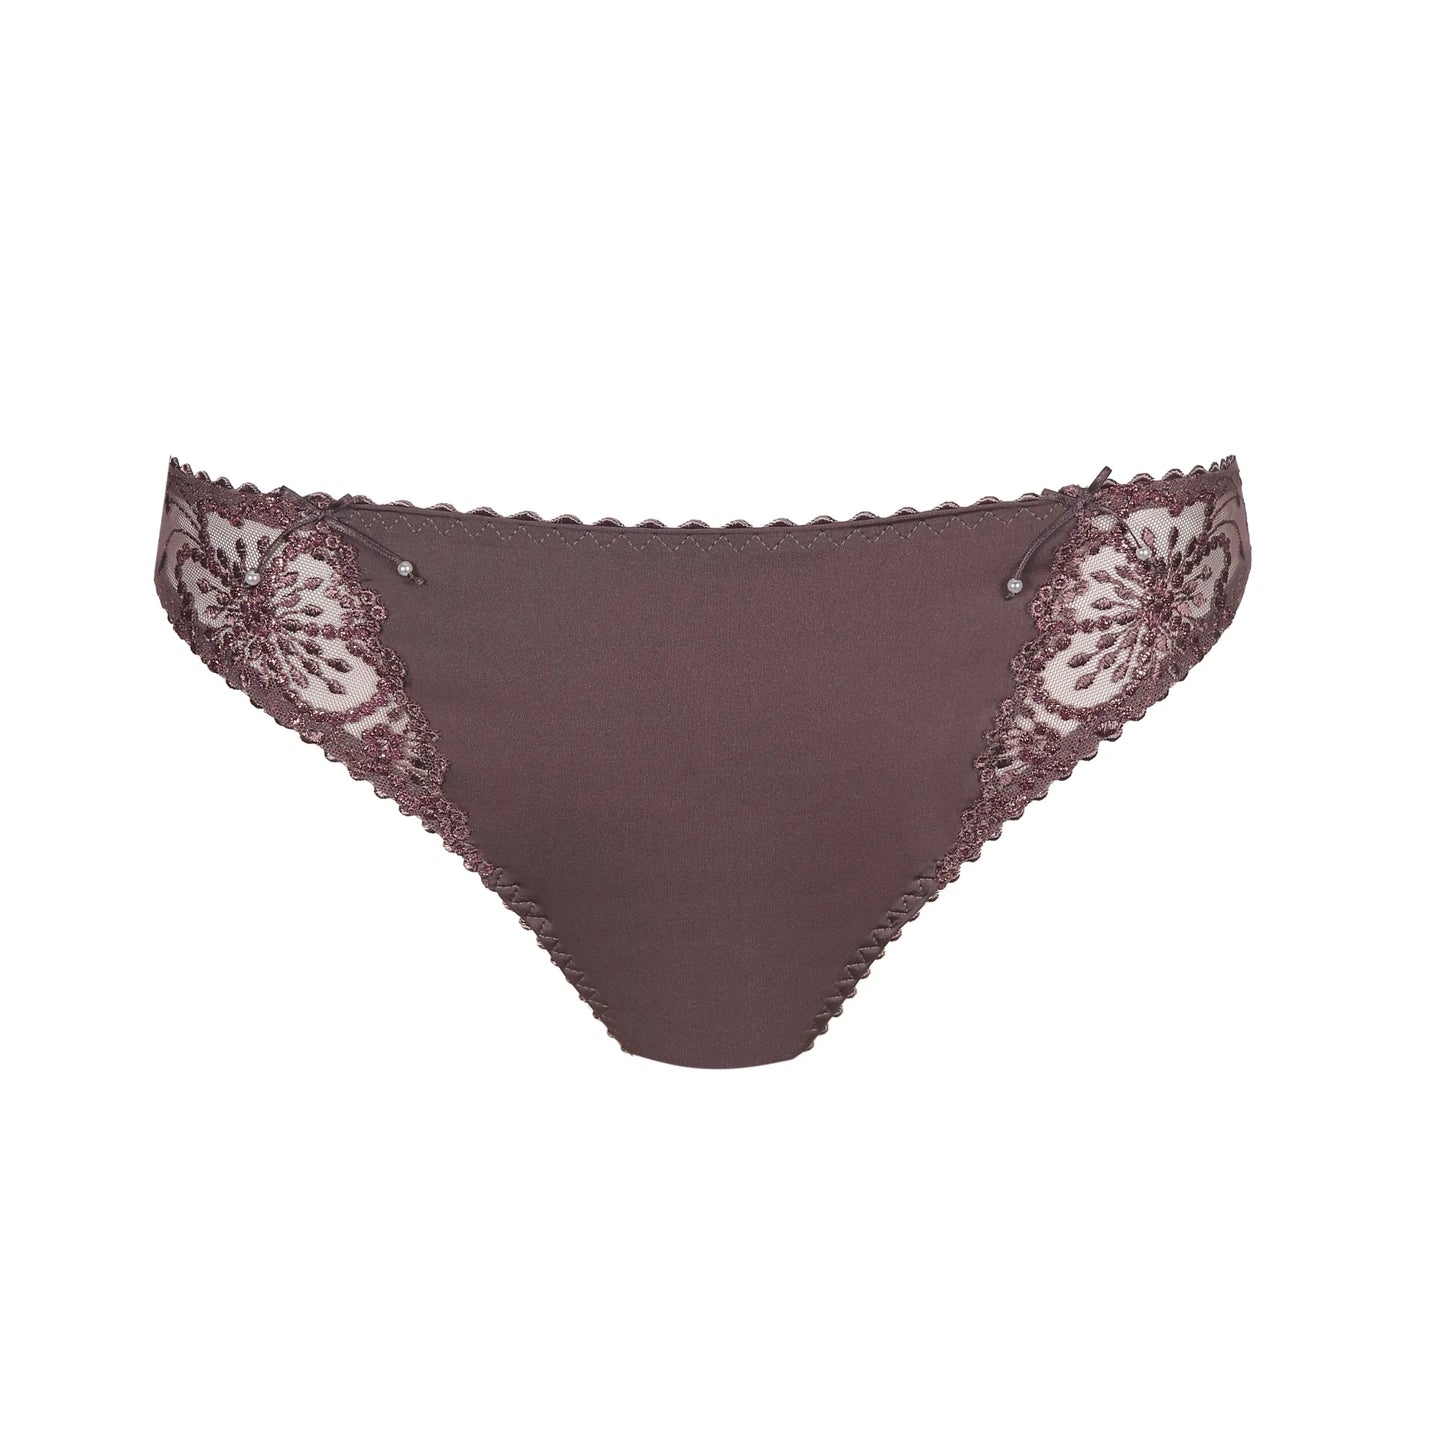 Jane Rio Brief - Candle Night - Limited Edition